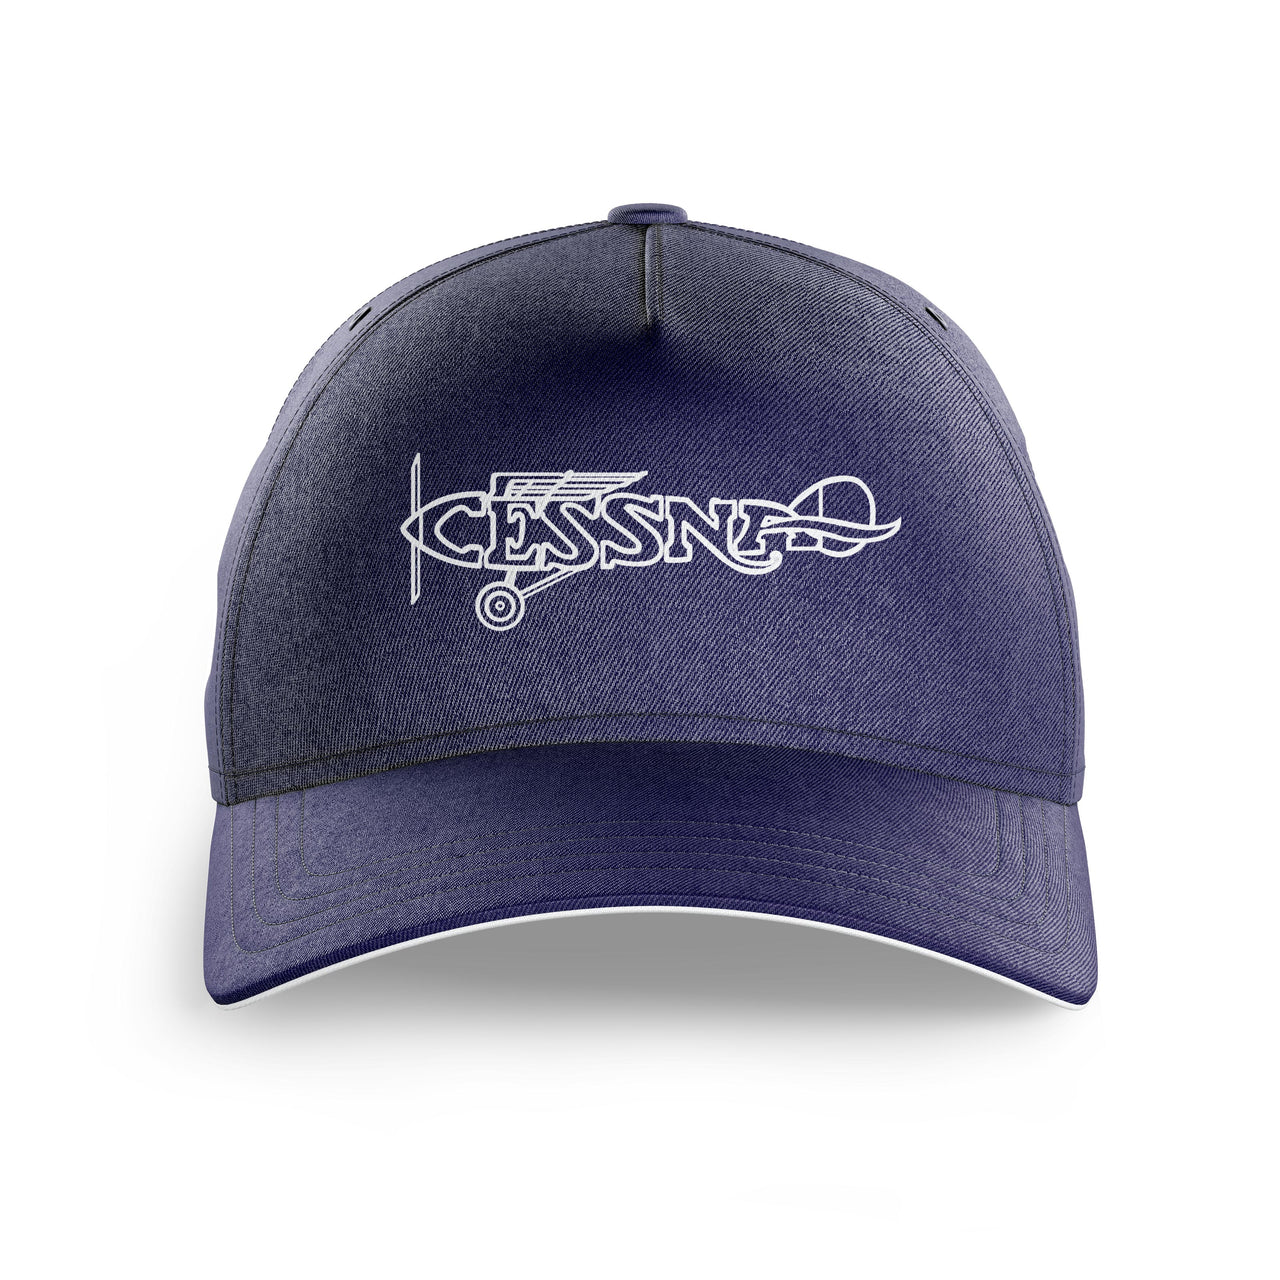 Special Cessna Text Printed Hats